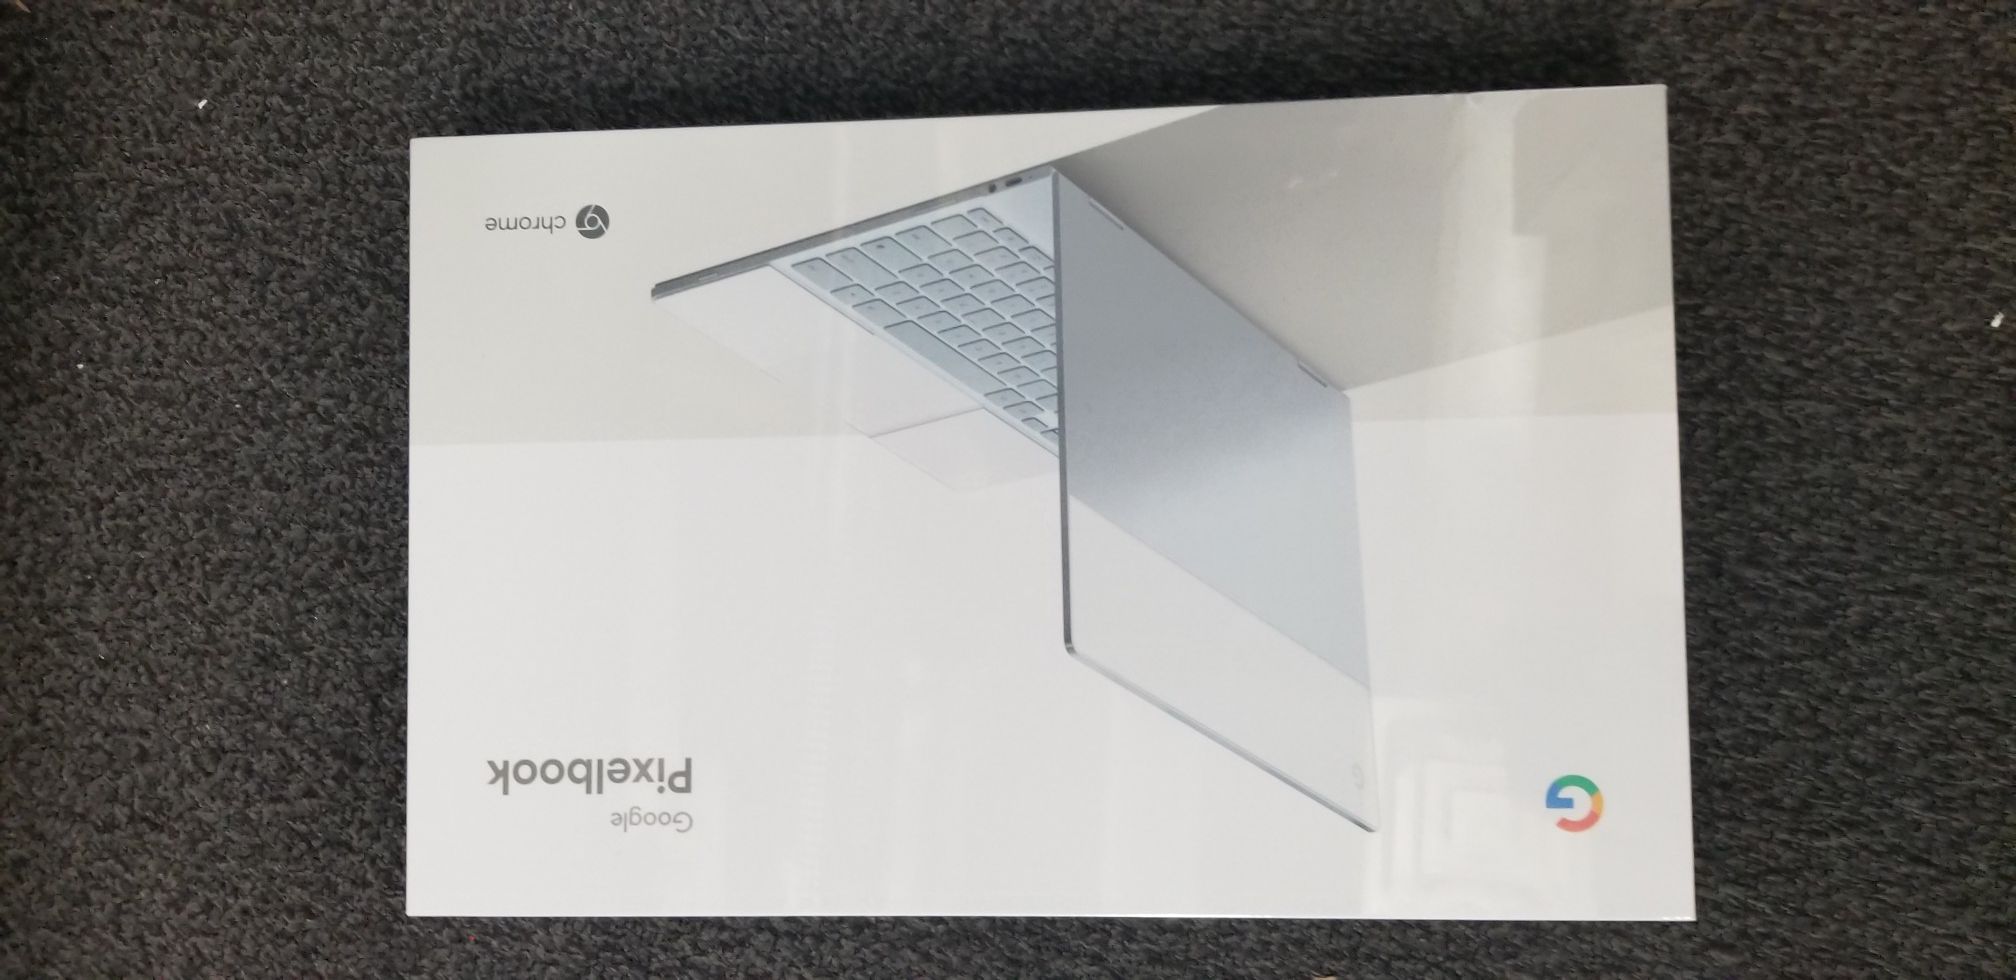 Pixelbook 12.3 core i5 256GB of Solid State Drive storage and 8GB of RAM